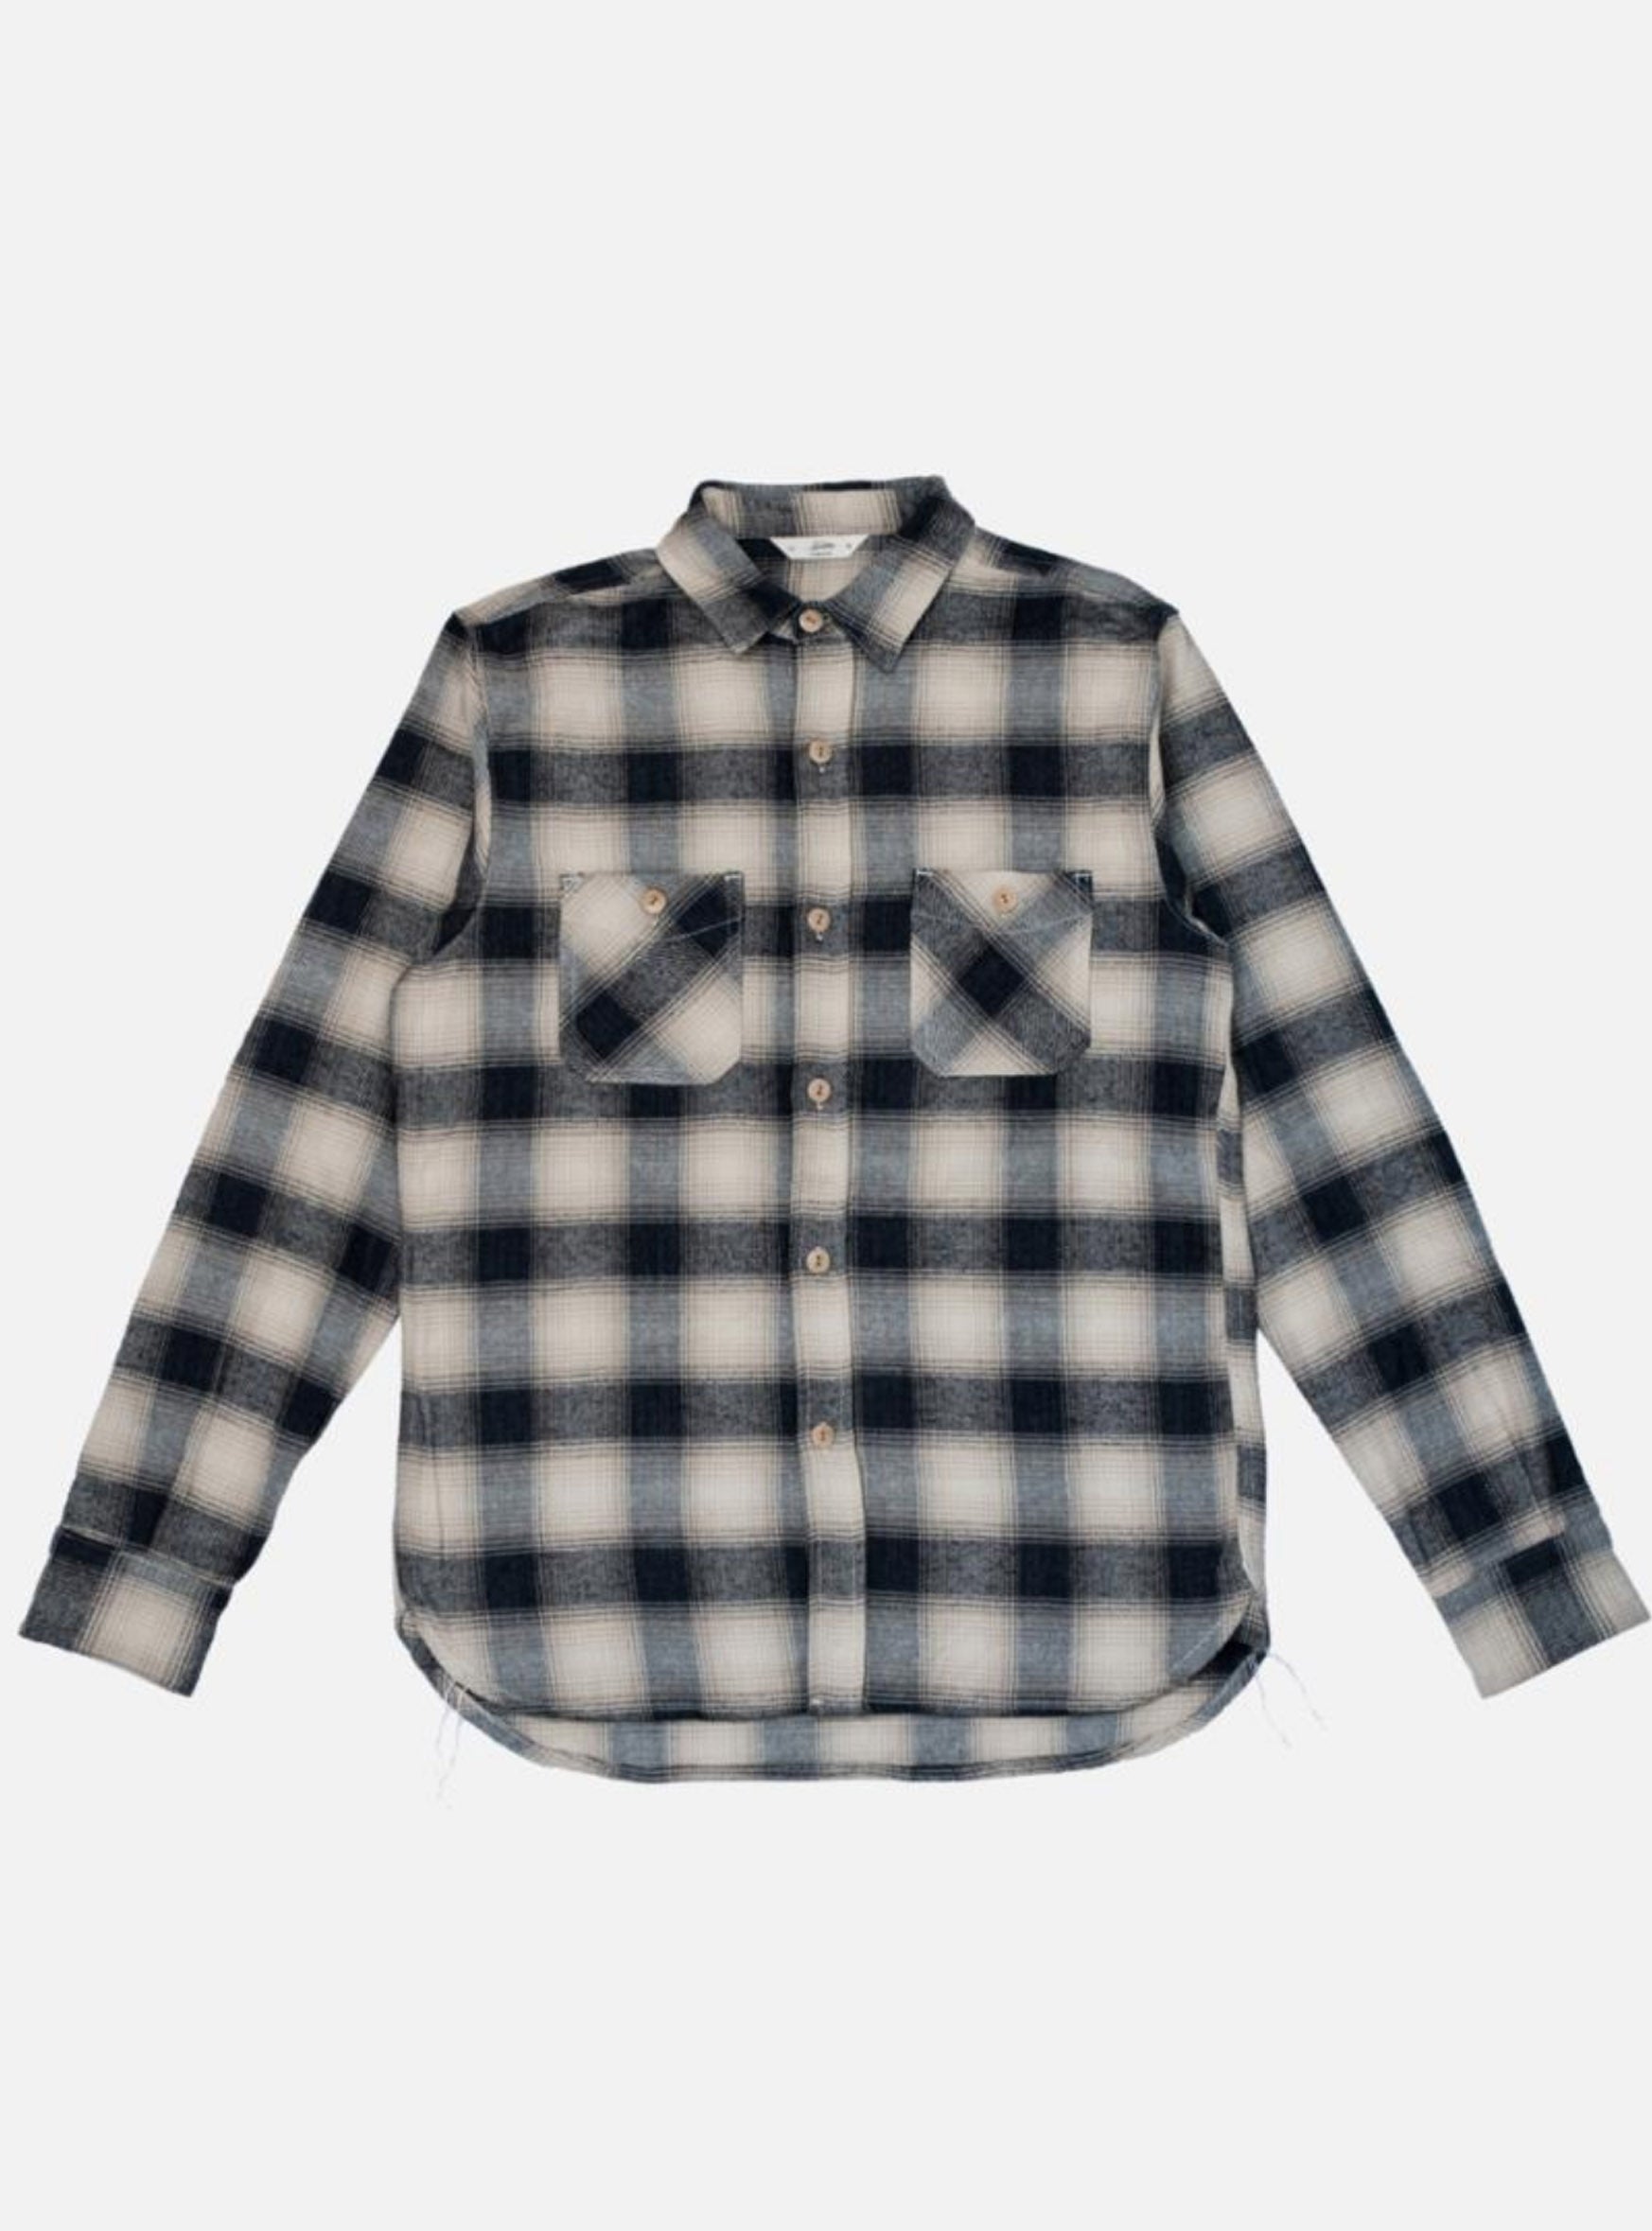 3sixteen Utility Shirt in Black Cream Ombre